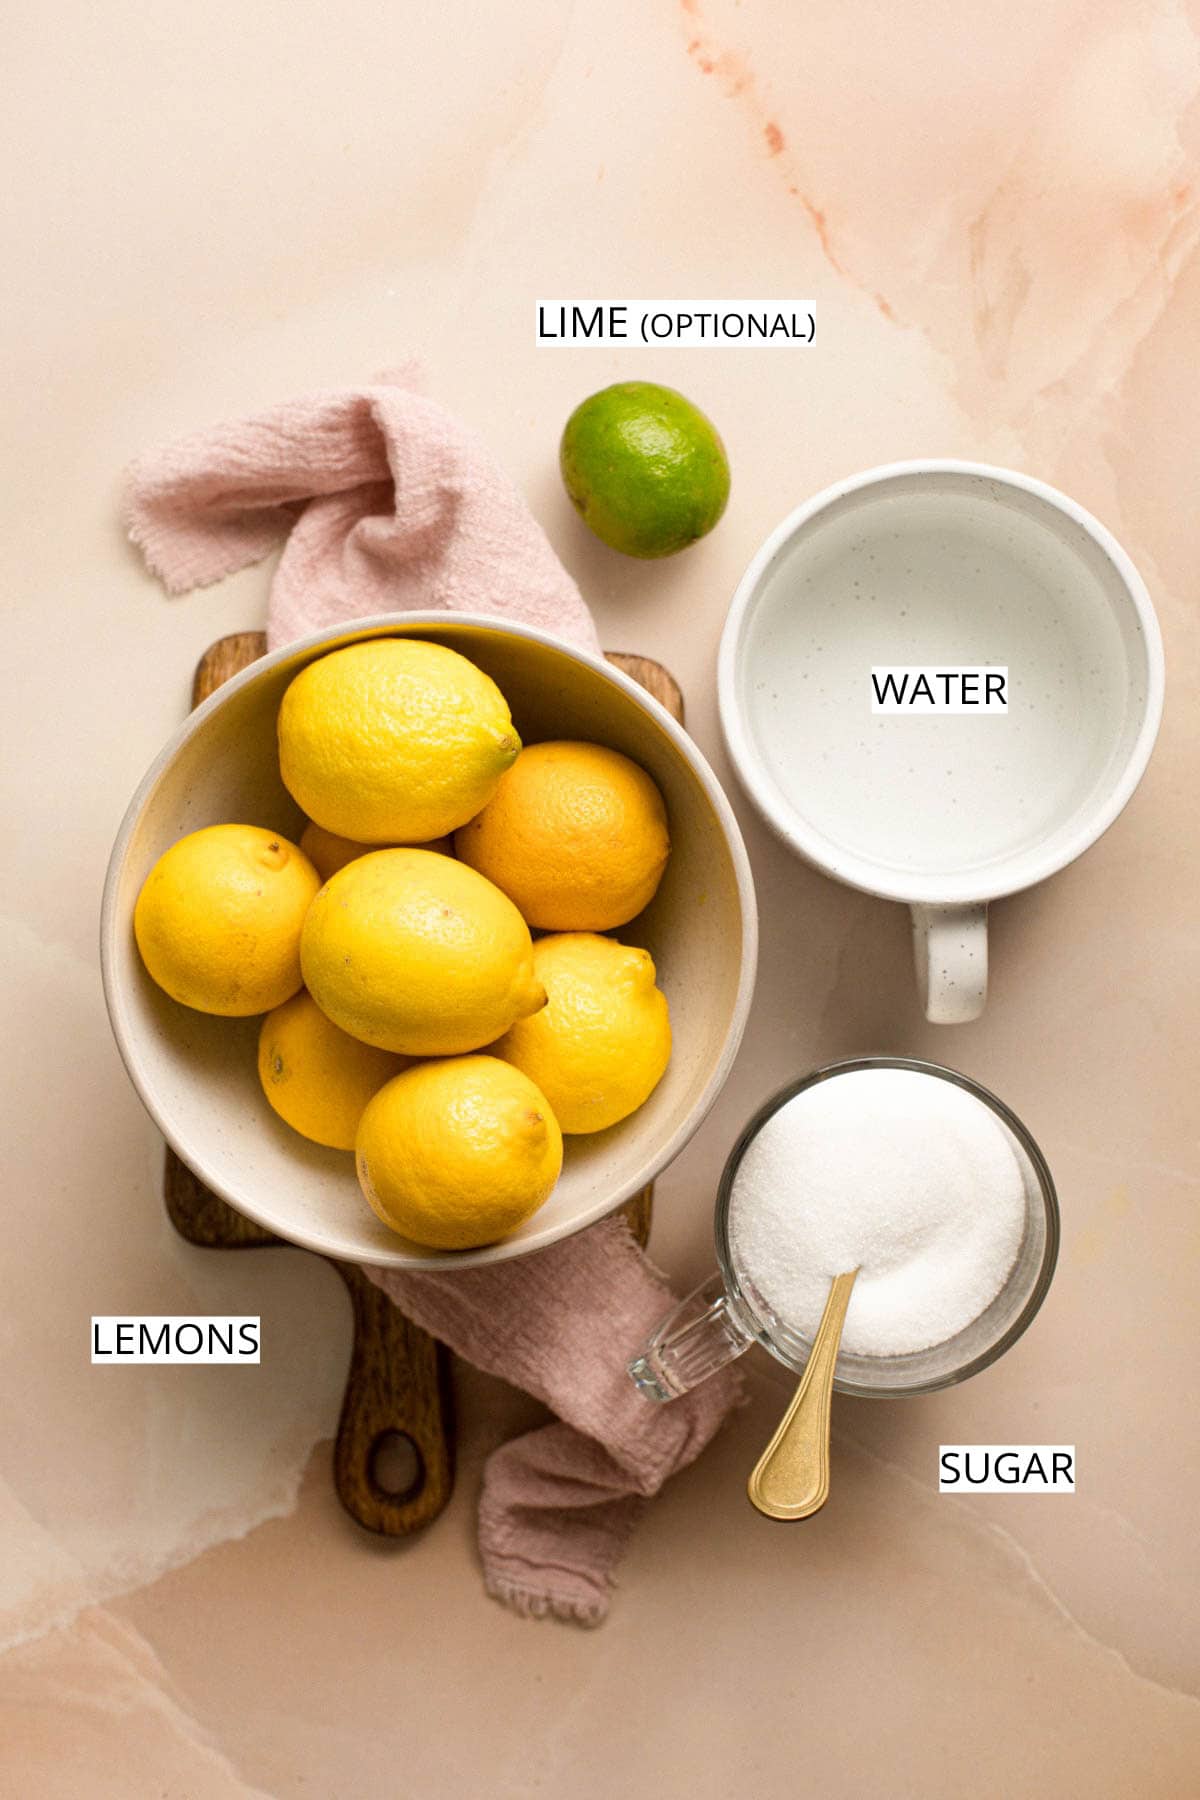 All ingredients needed to make frozen lemonade concentrate.